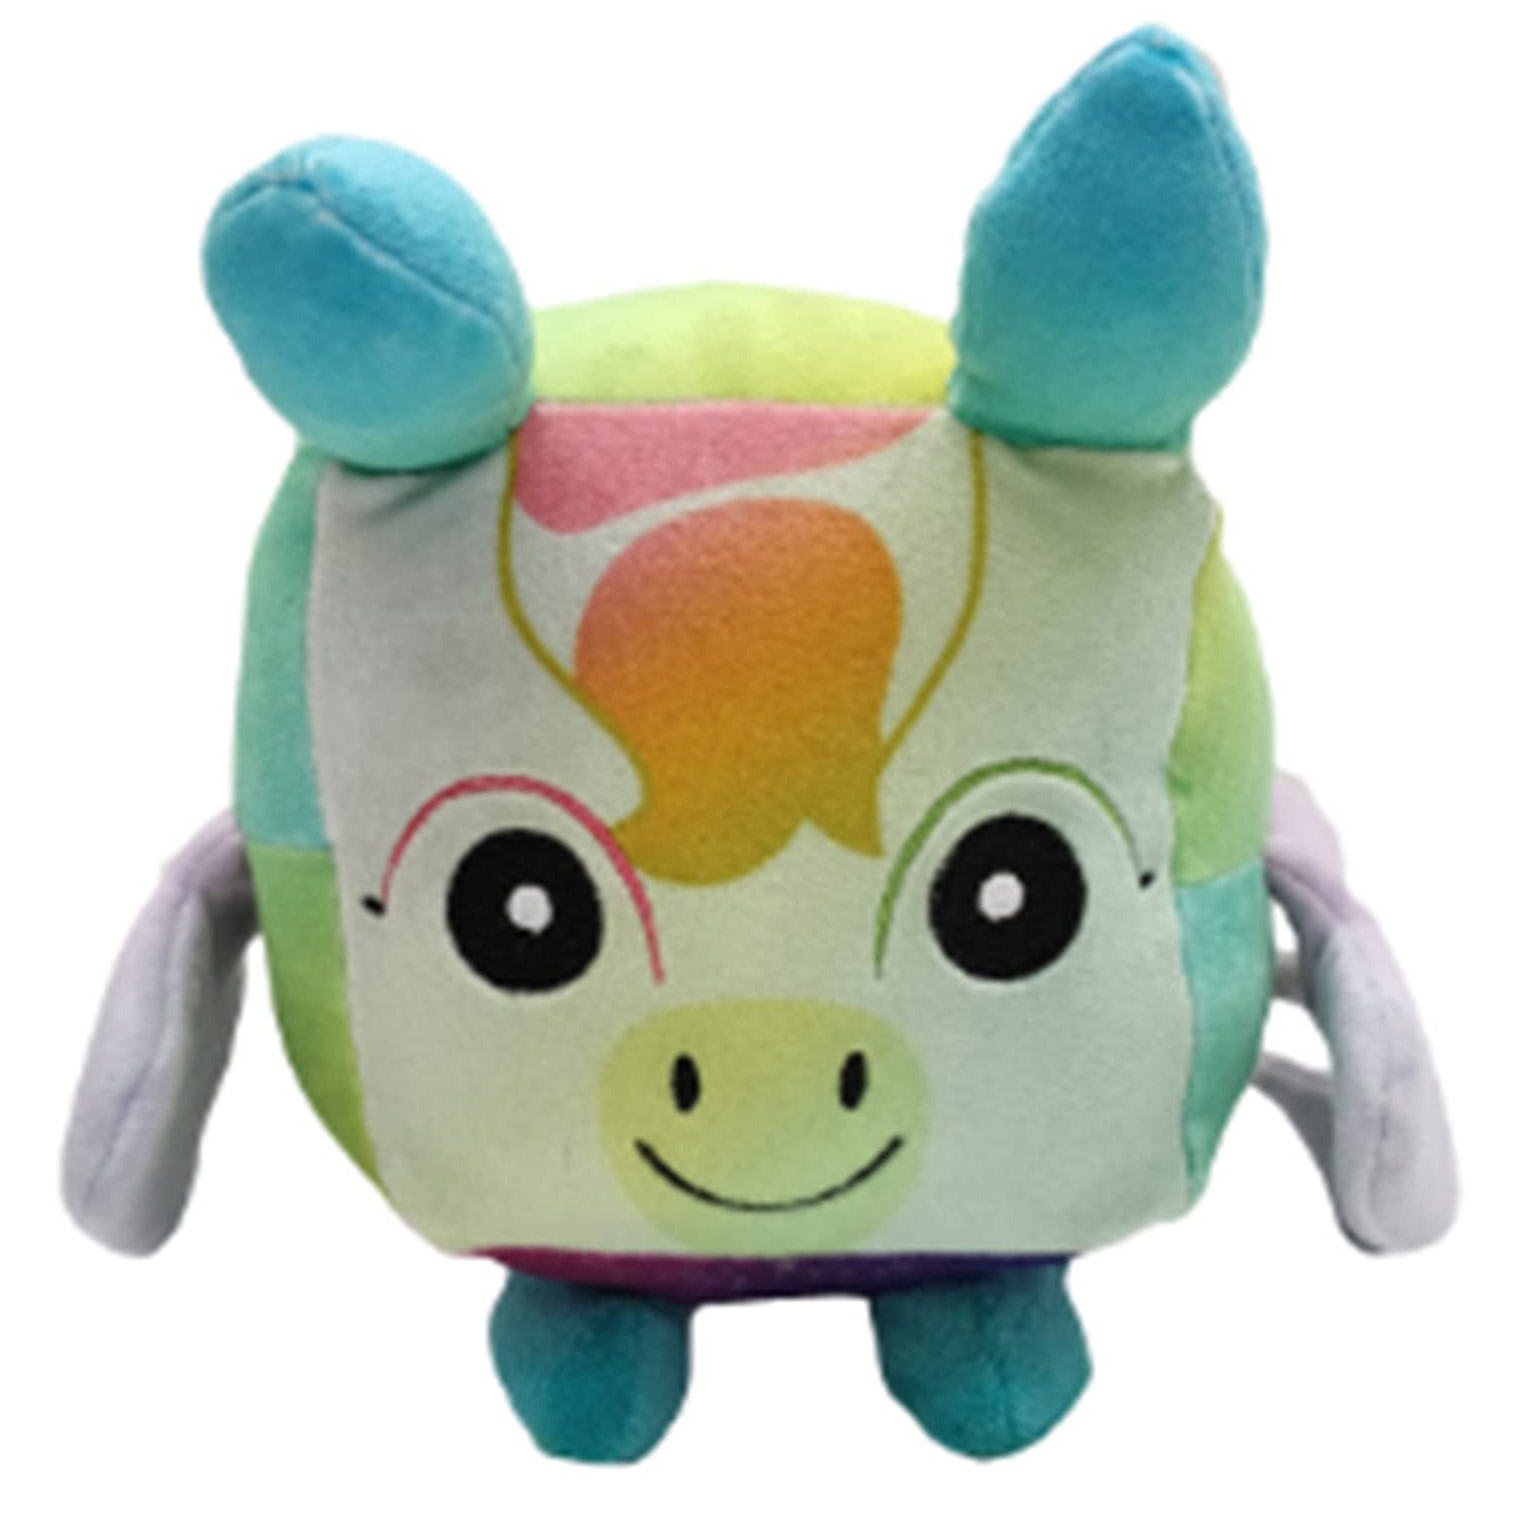 Horse Stuffed Animal Kawaii Cute Soft Toy for Kids and Fans